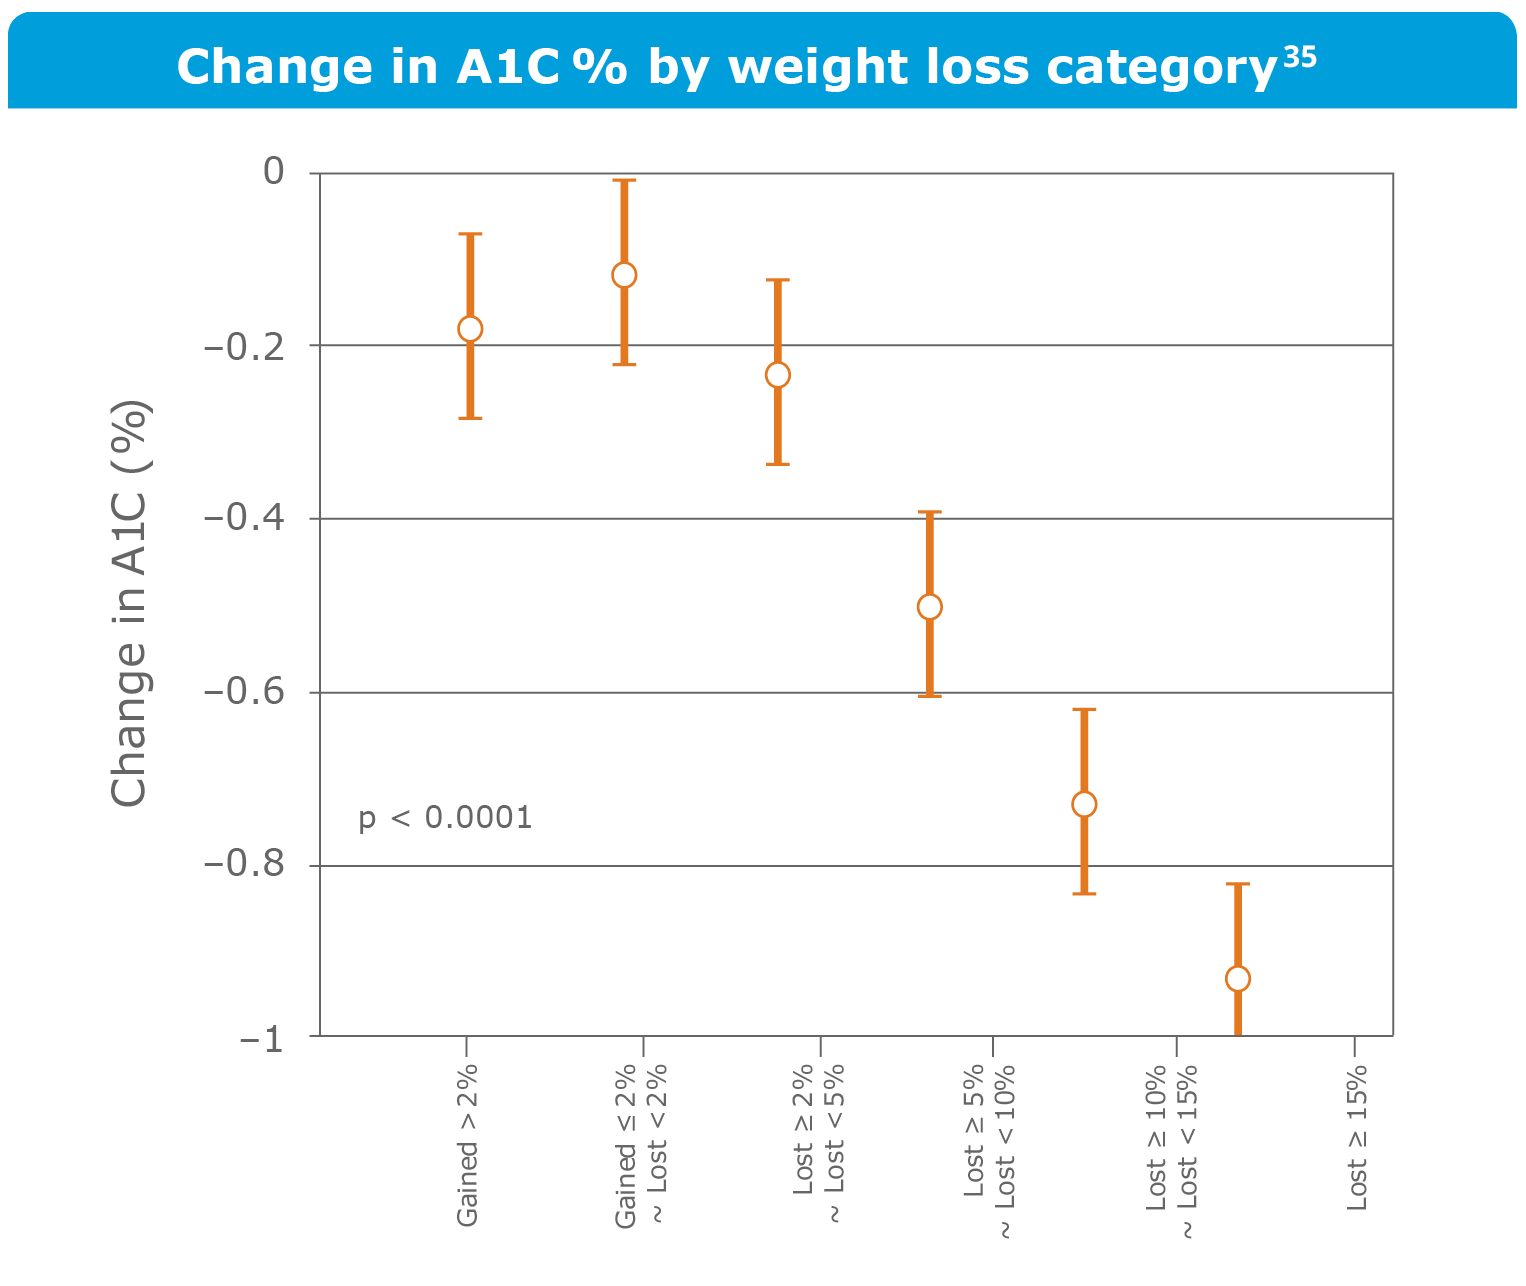 Change in HbA1c% by weight loss category